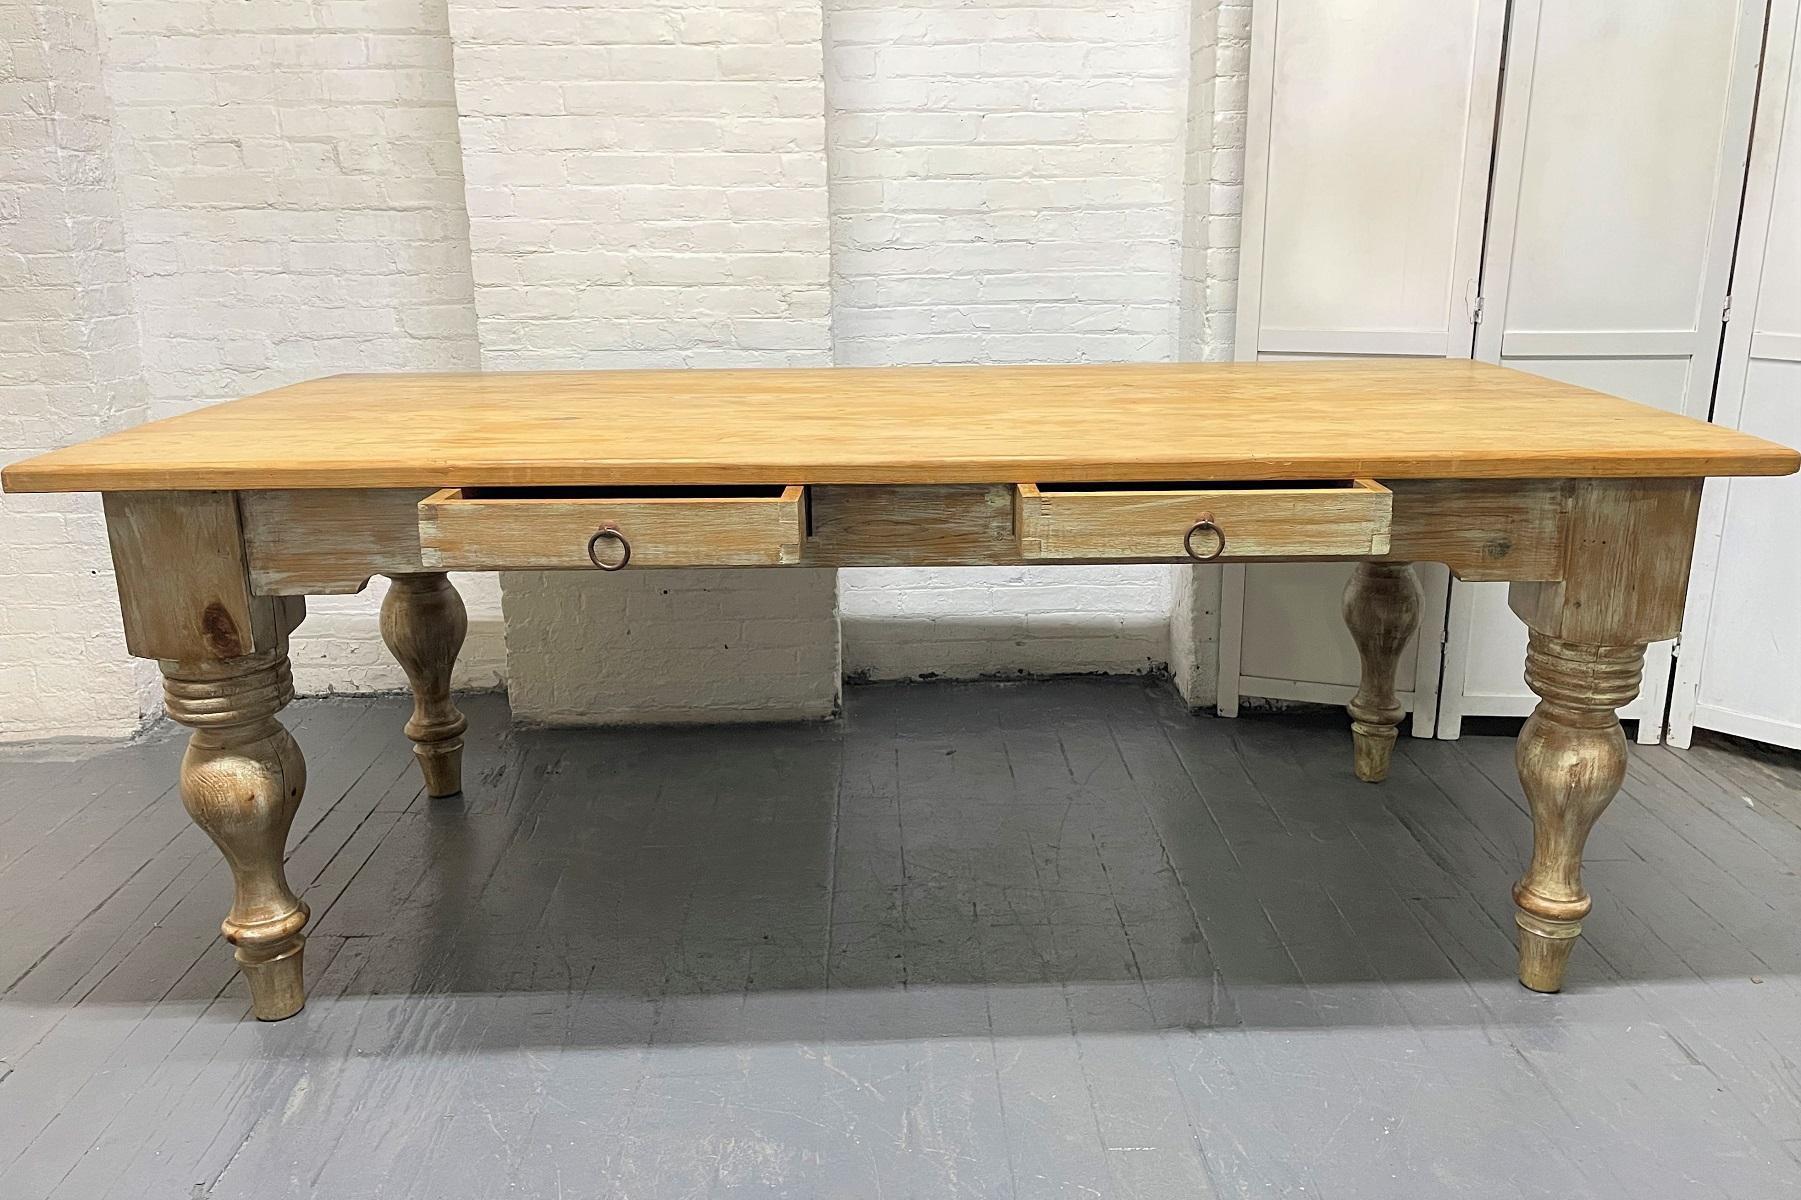 Antique Style Pine Farm Table. The table has two pull-out drawers with metal handles and a finished back. Can also be used as a large desk.